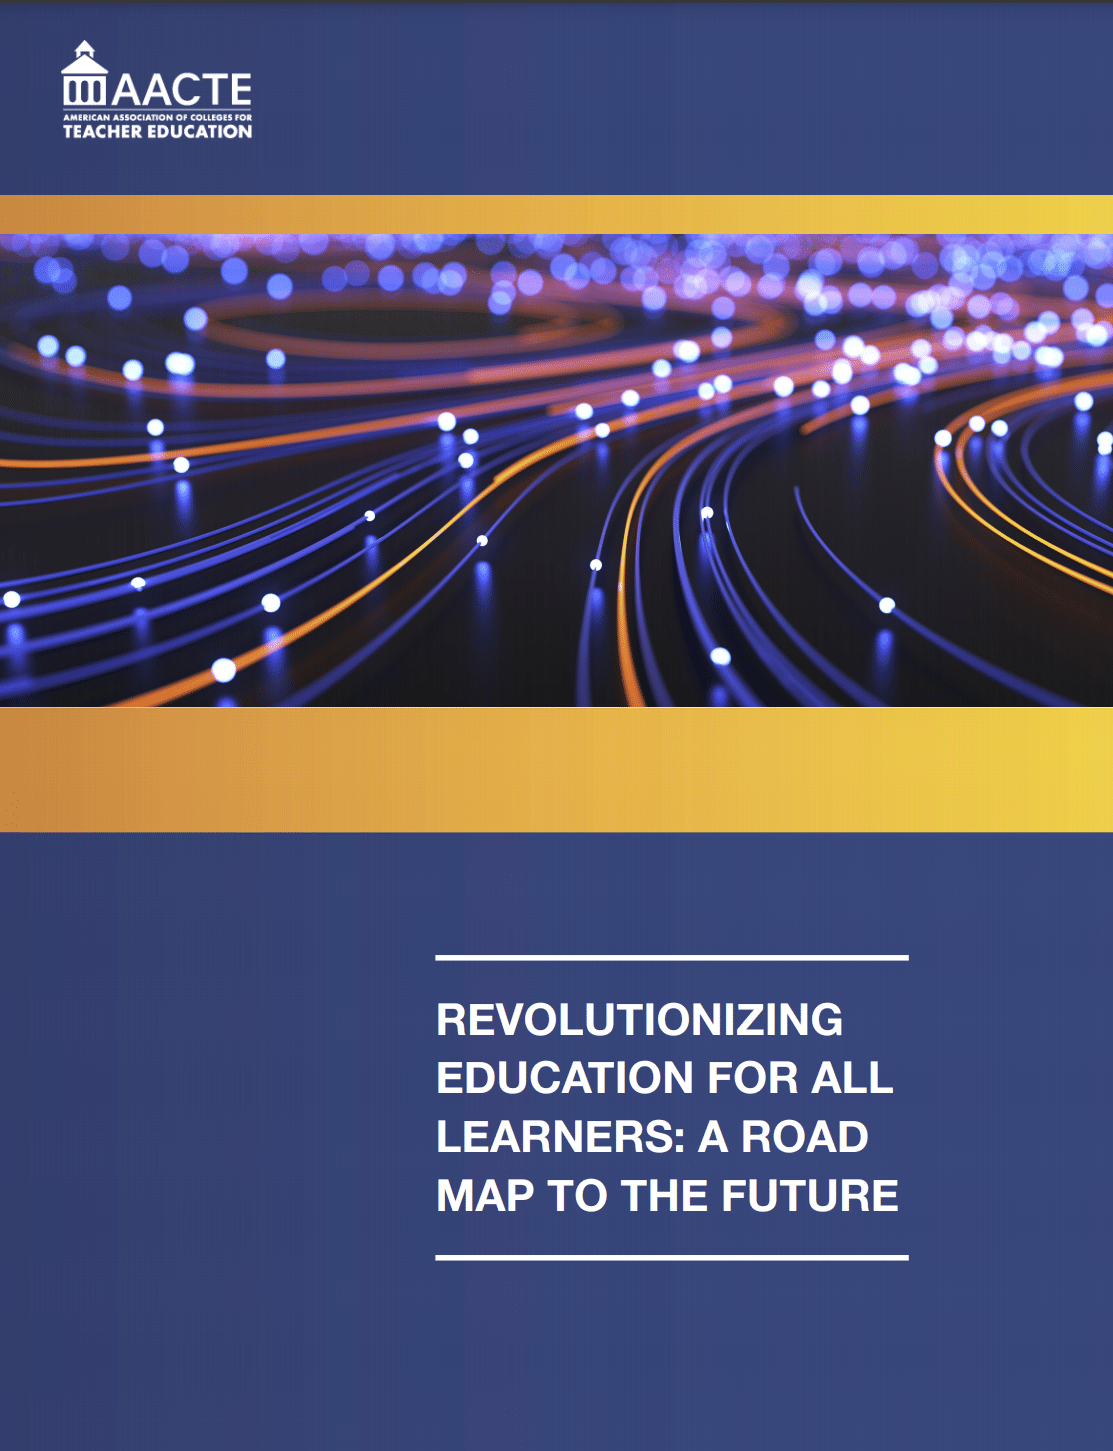 Revolutionizing Education for All Learners: A Road Map to the Future